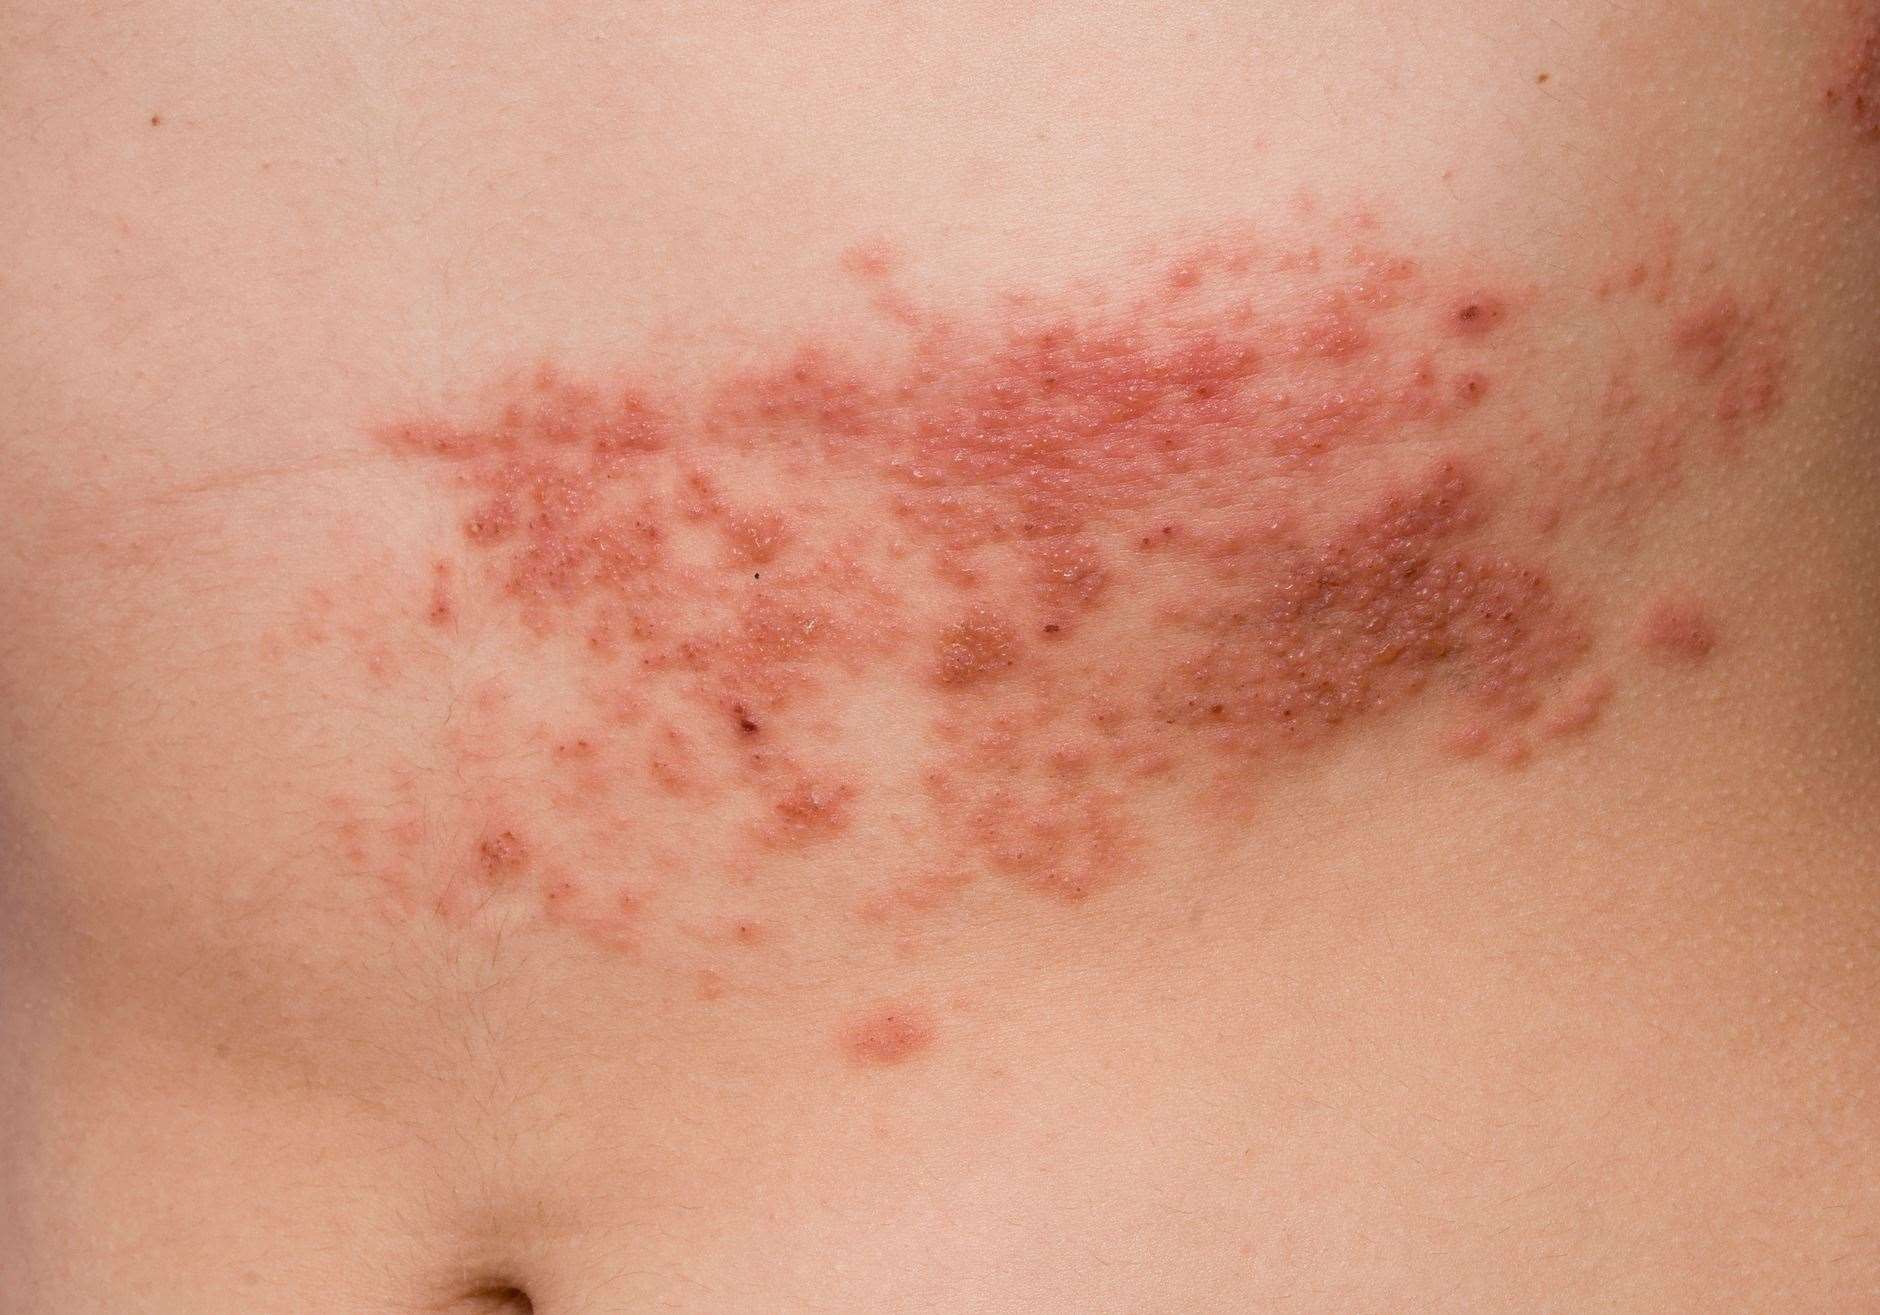 Those with shingles develop a painful rash. Image: iStock.